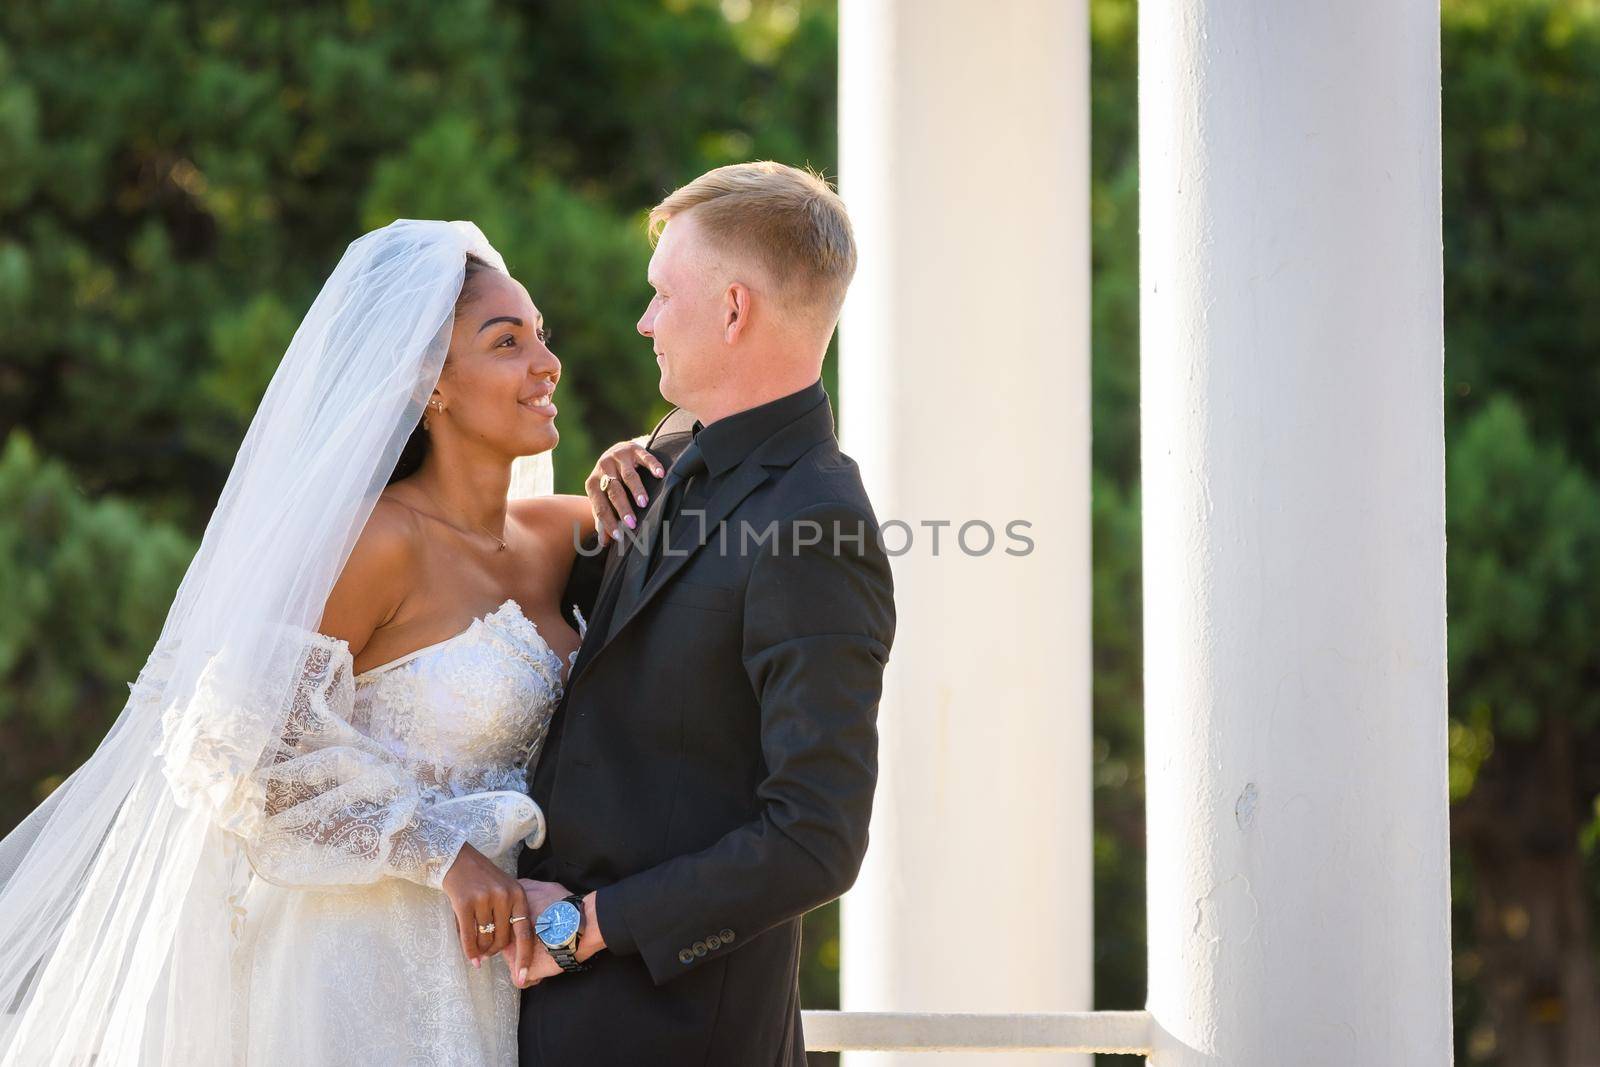 Half-length portrait of mixed-racial newlyweds on a walk against the background of columns and greenery by Madhourse